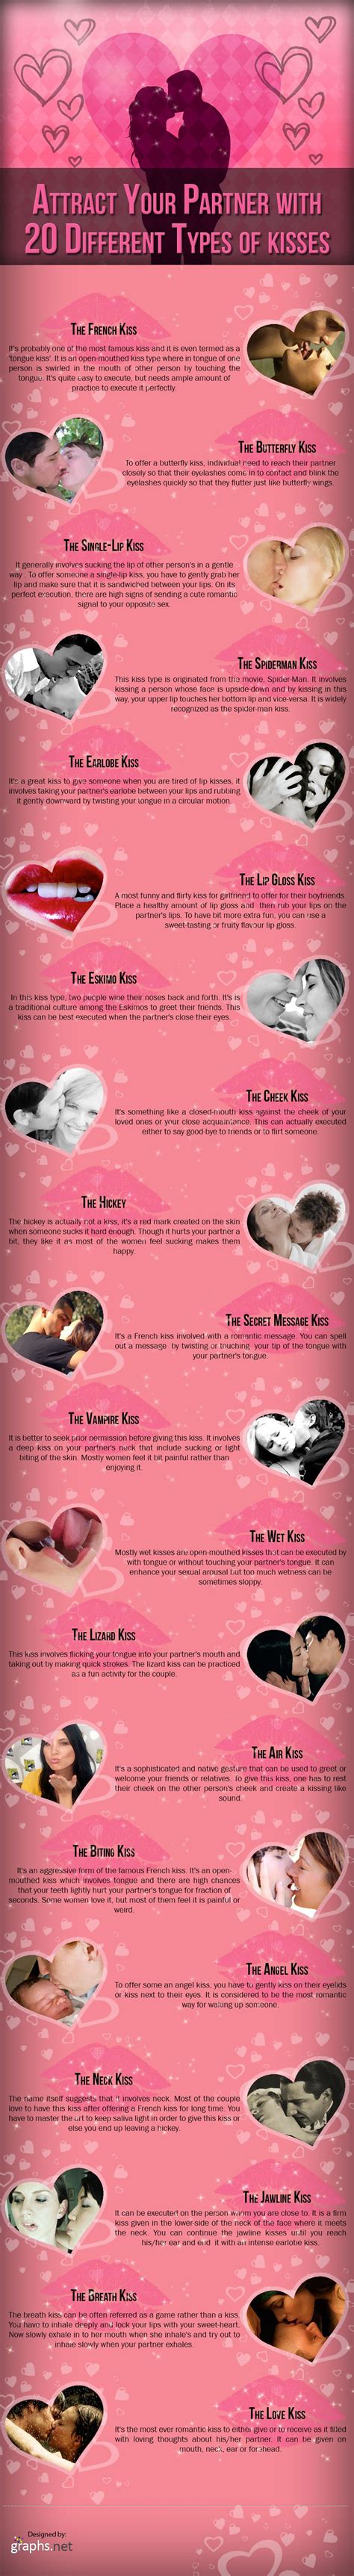 Attract Your Partner With 20 Different Kinds Of Kisses Allabout